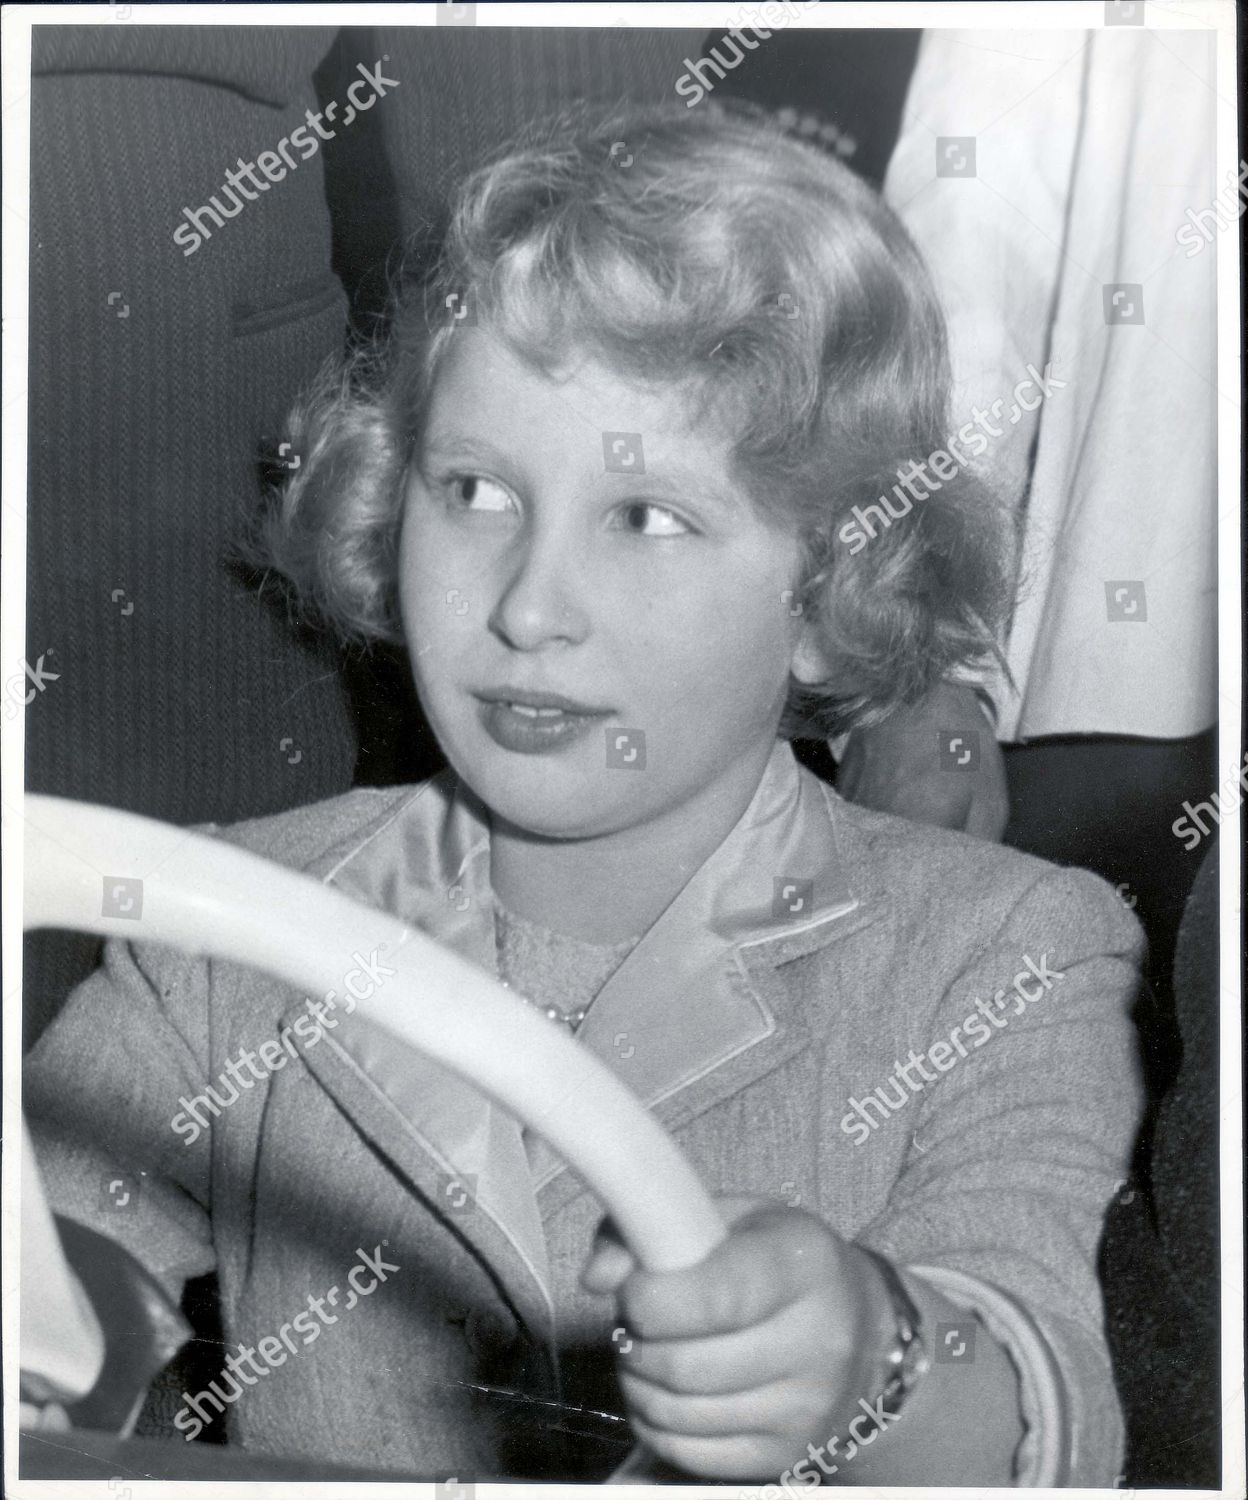 princess-anne-now-princess-royal-1959-picture-shows-princess-anne-visiting-bertram-hills-circus-at-olympia-shutterstock-editorial-887050a.jpg